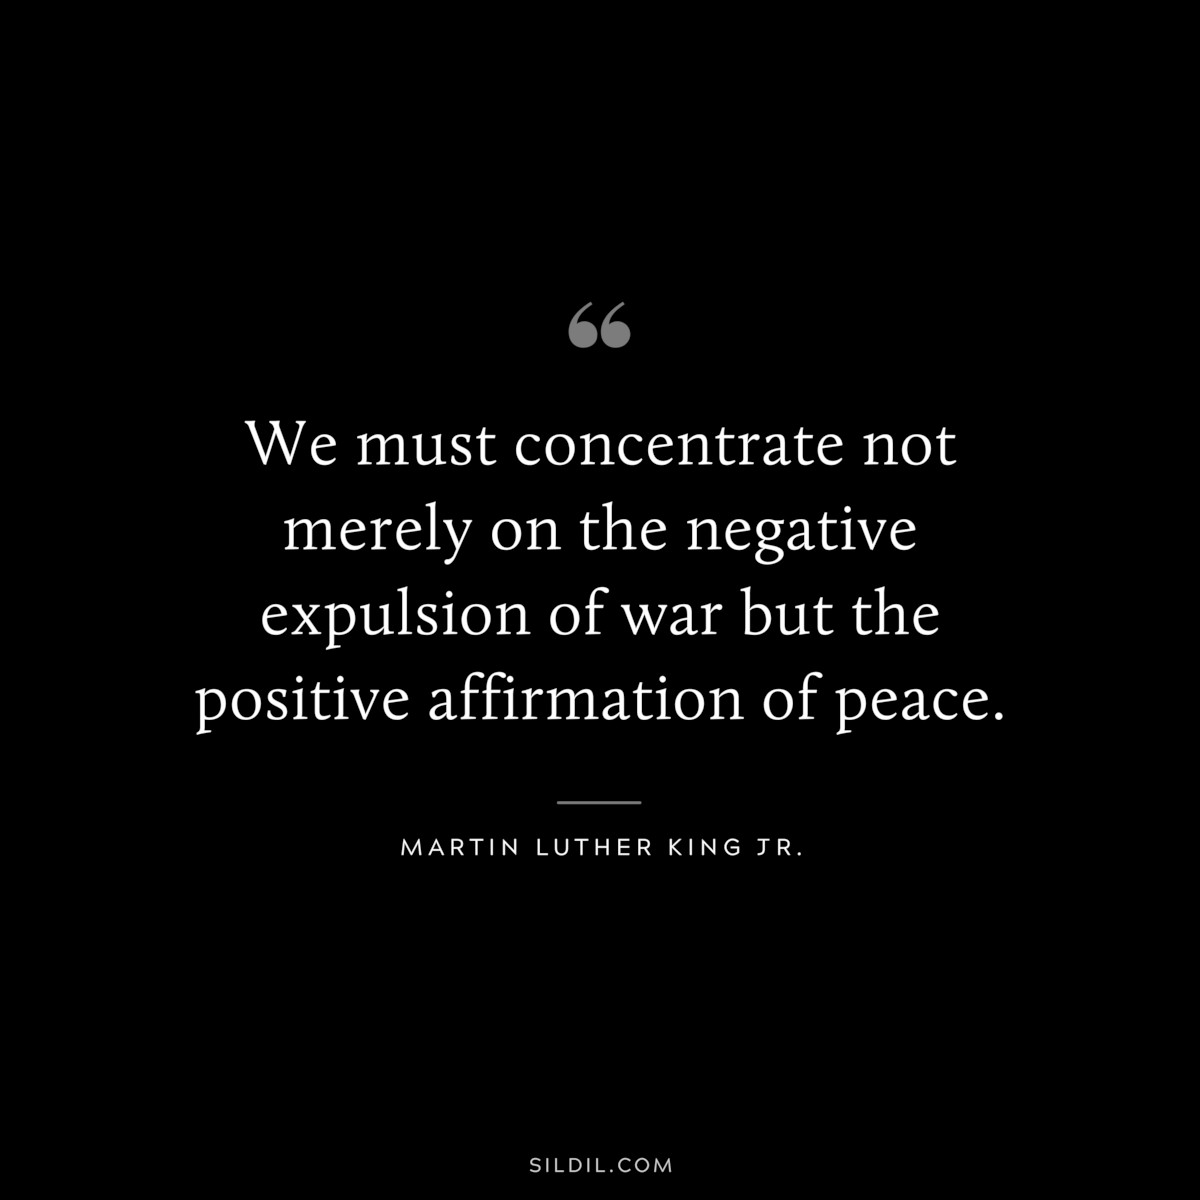 We must concentrate not merely on the negative expulsion of war but the positive affirmation of peace. ― Martin Luther King Jr.